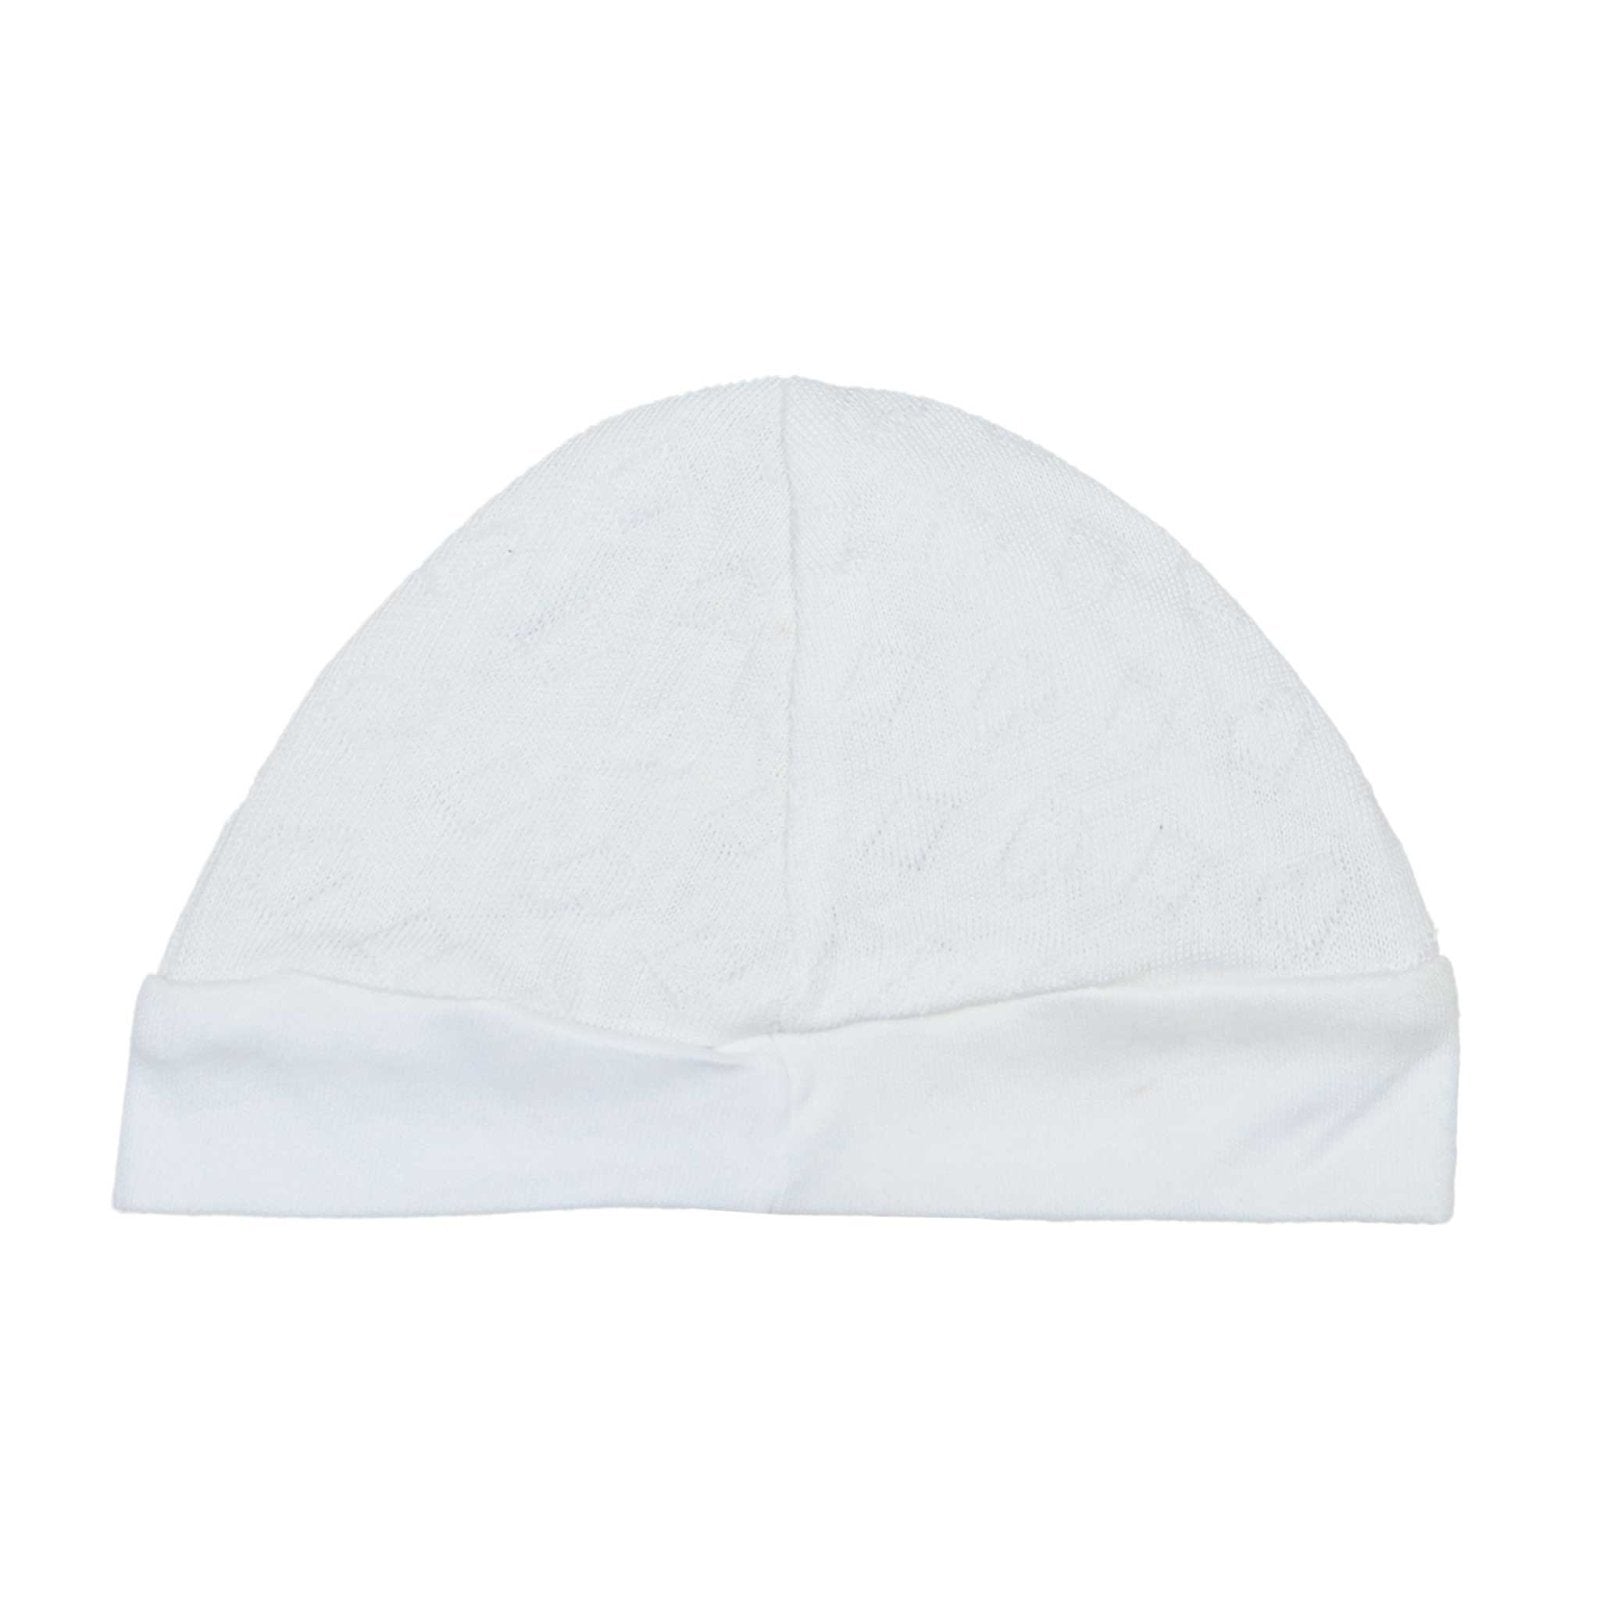 Baby Cap Plain White by Little Darling